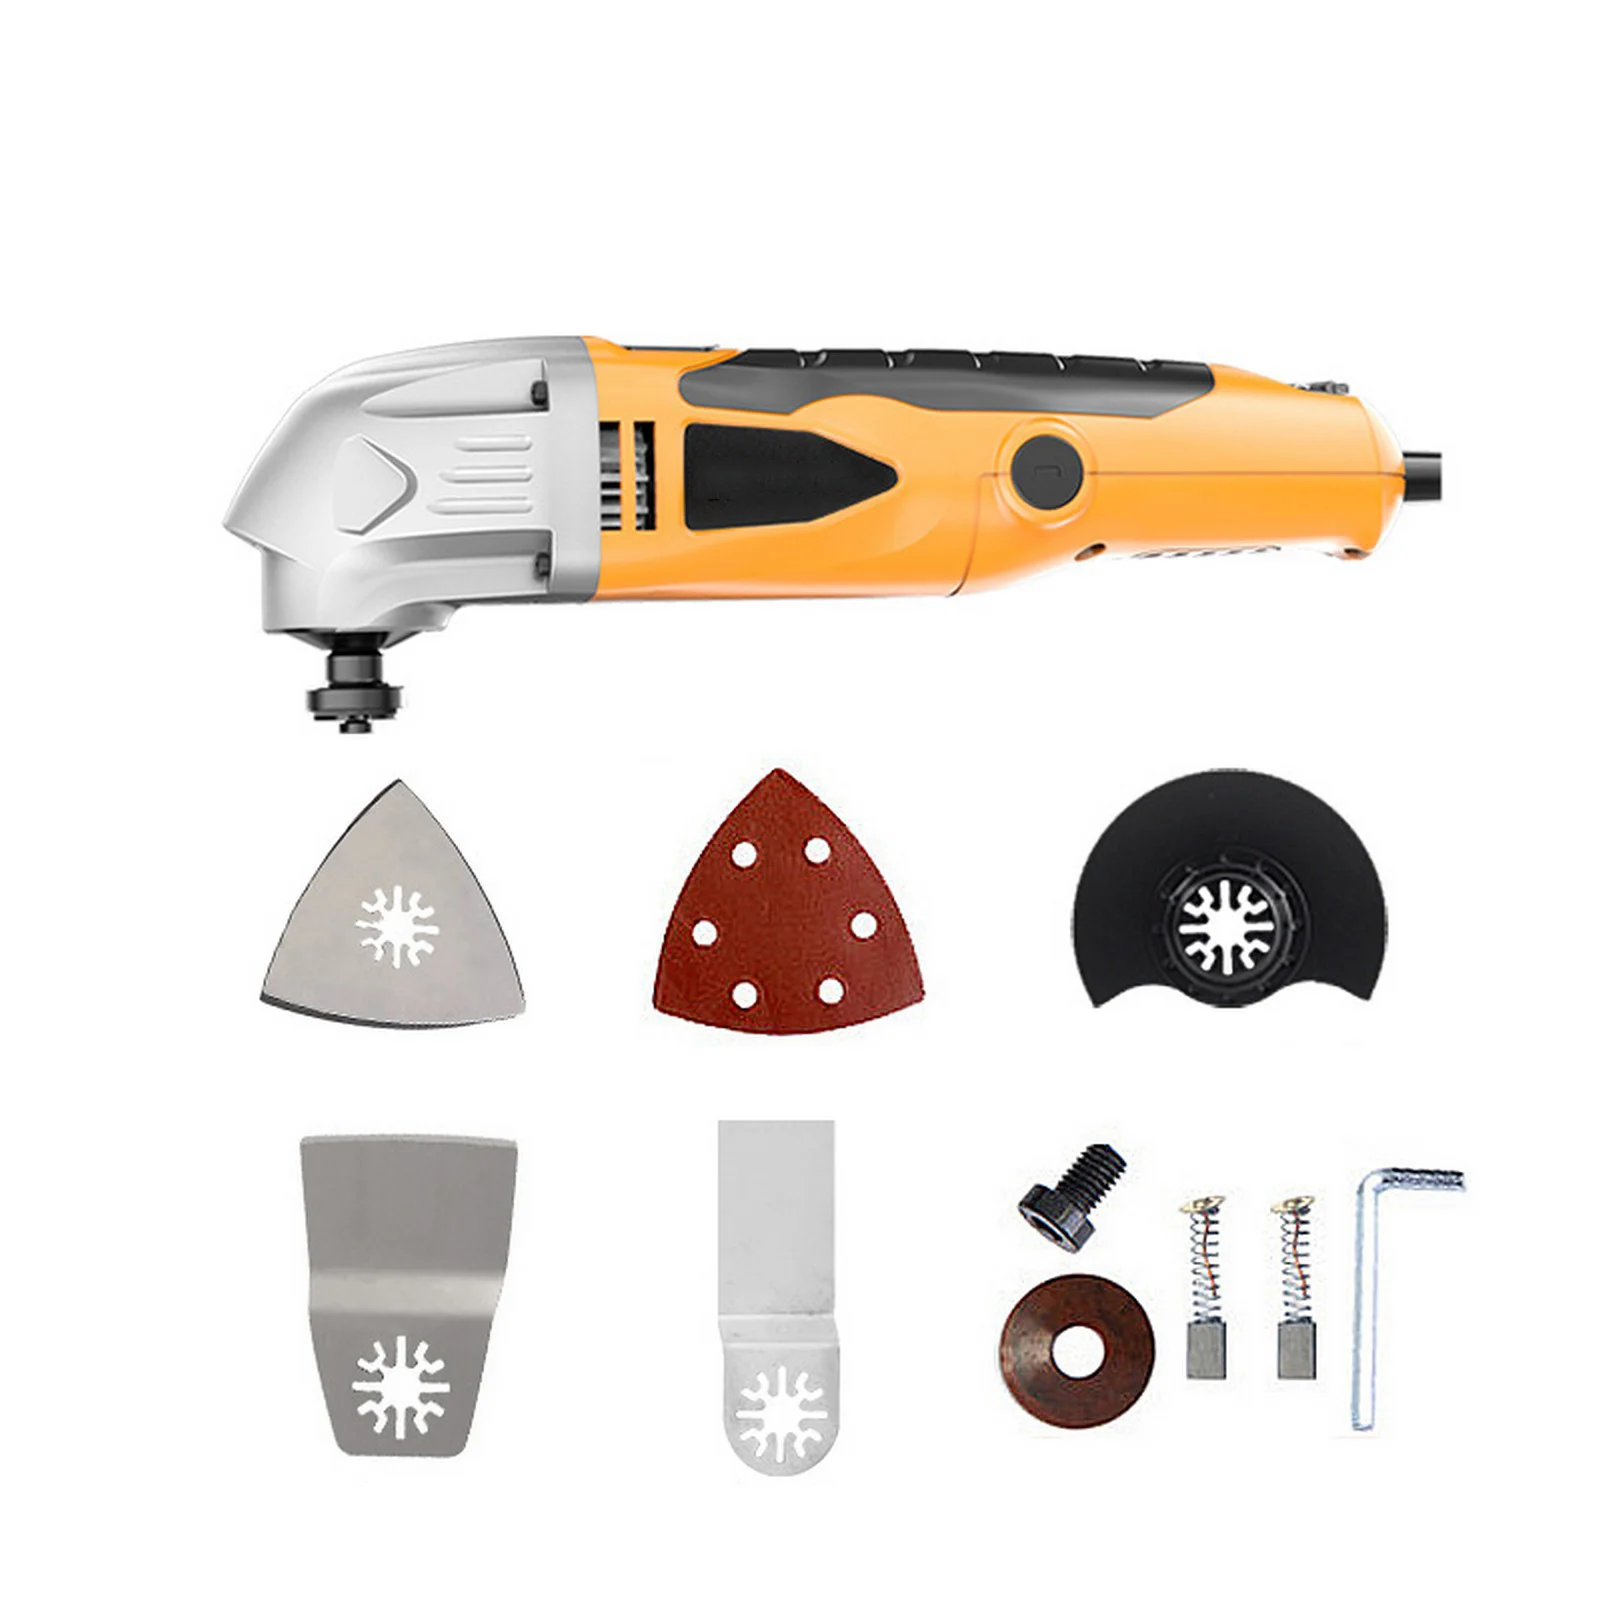 220V Electric Oscillating Trimmer 6-speed Multi-Tools Home Power Tools Trimmer Woodworking Tools Electric Saw Polishing Machine